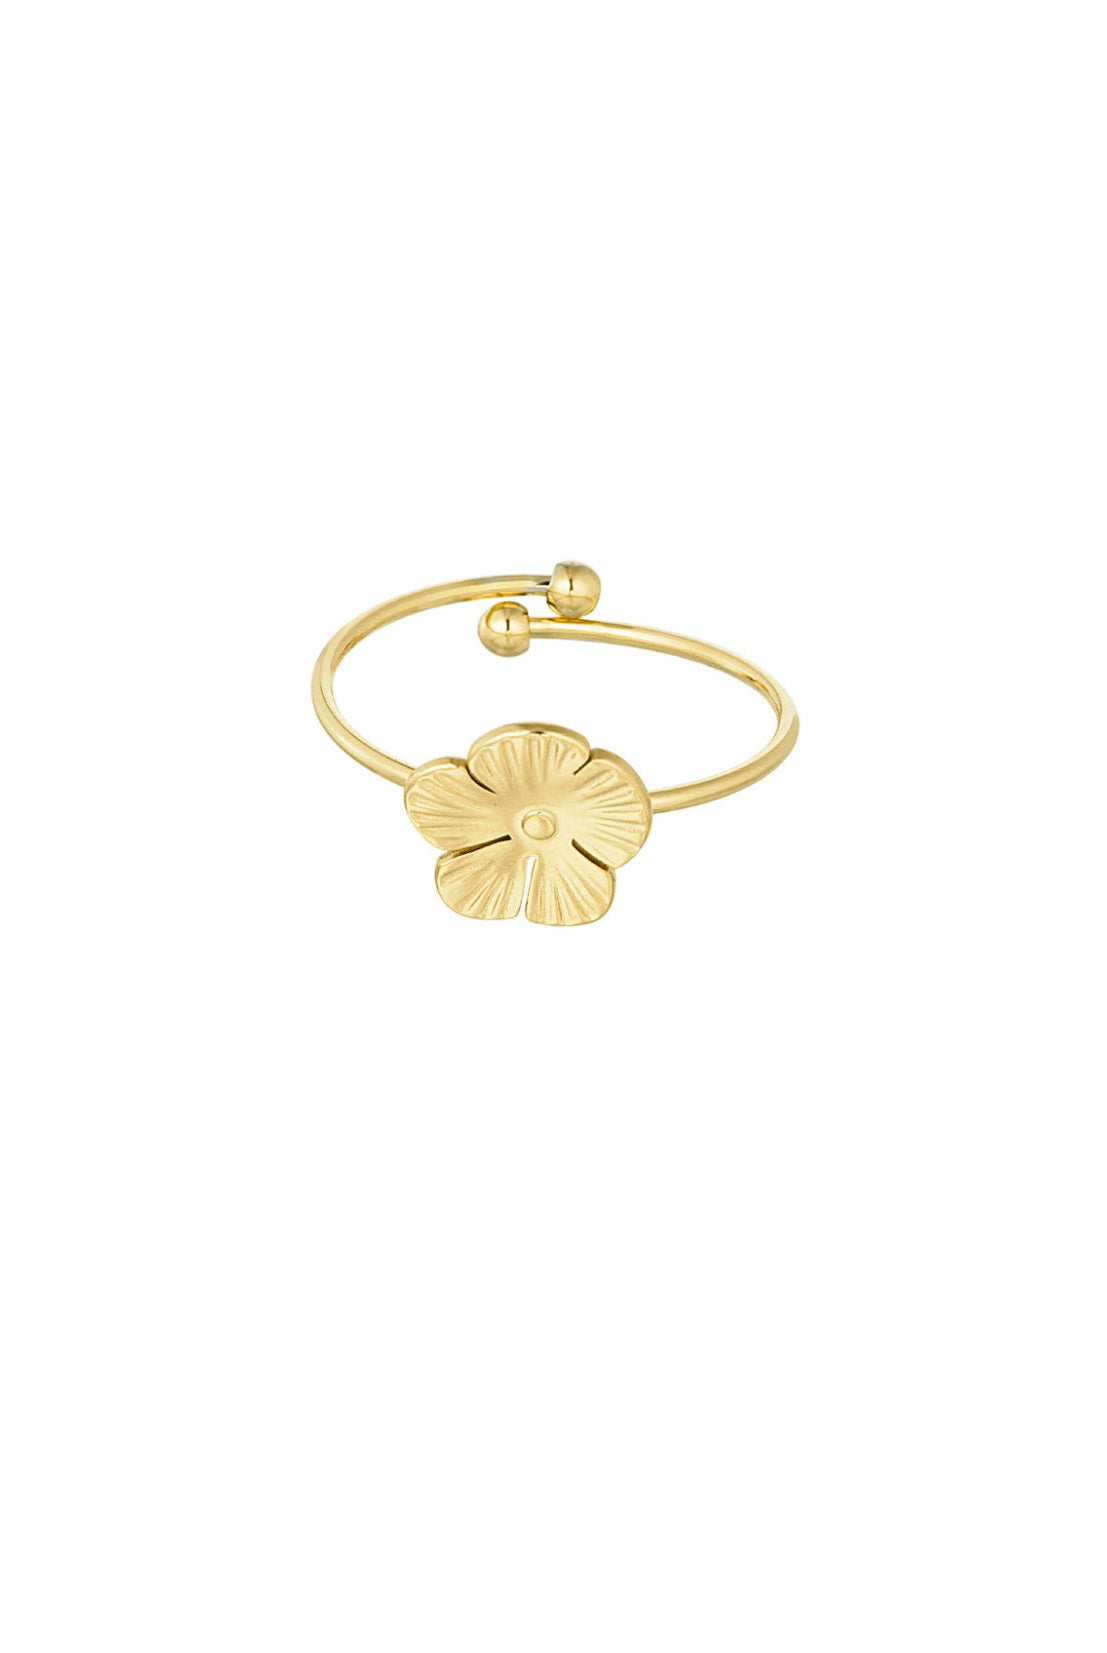 ♥︎CUTE FLOWER RING - My Favourites